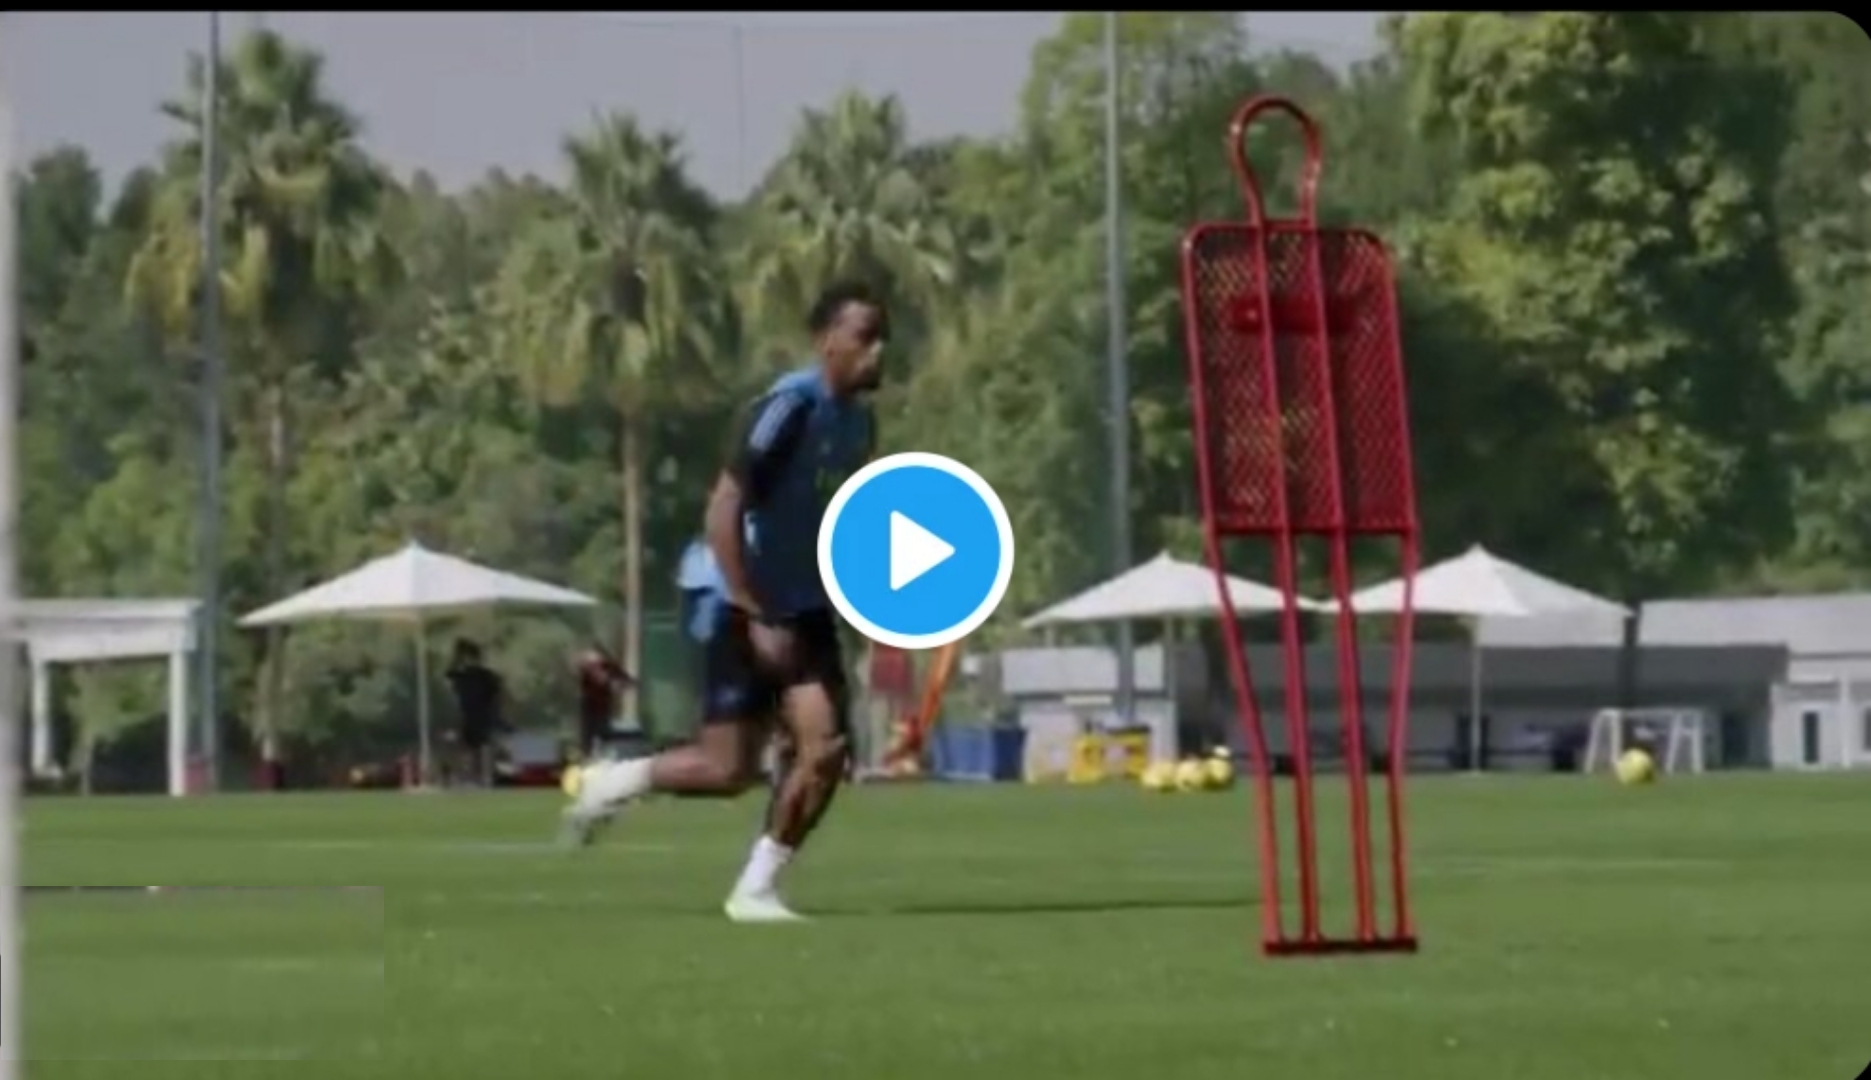 ‘Like a new signing’: Jurrien Timber back on the grass as he dribbles paste three players to score a goal in Arsenal’s training camp in Dubai… SEE VIDEO